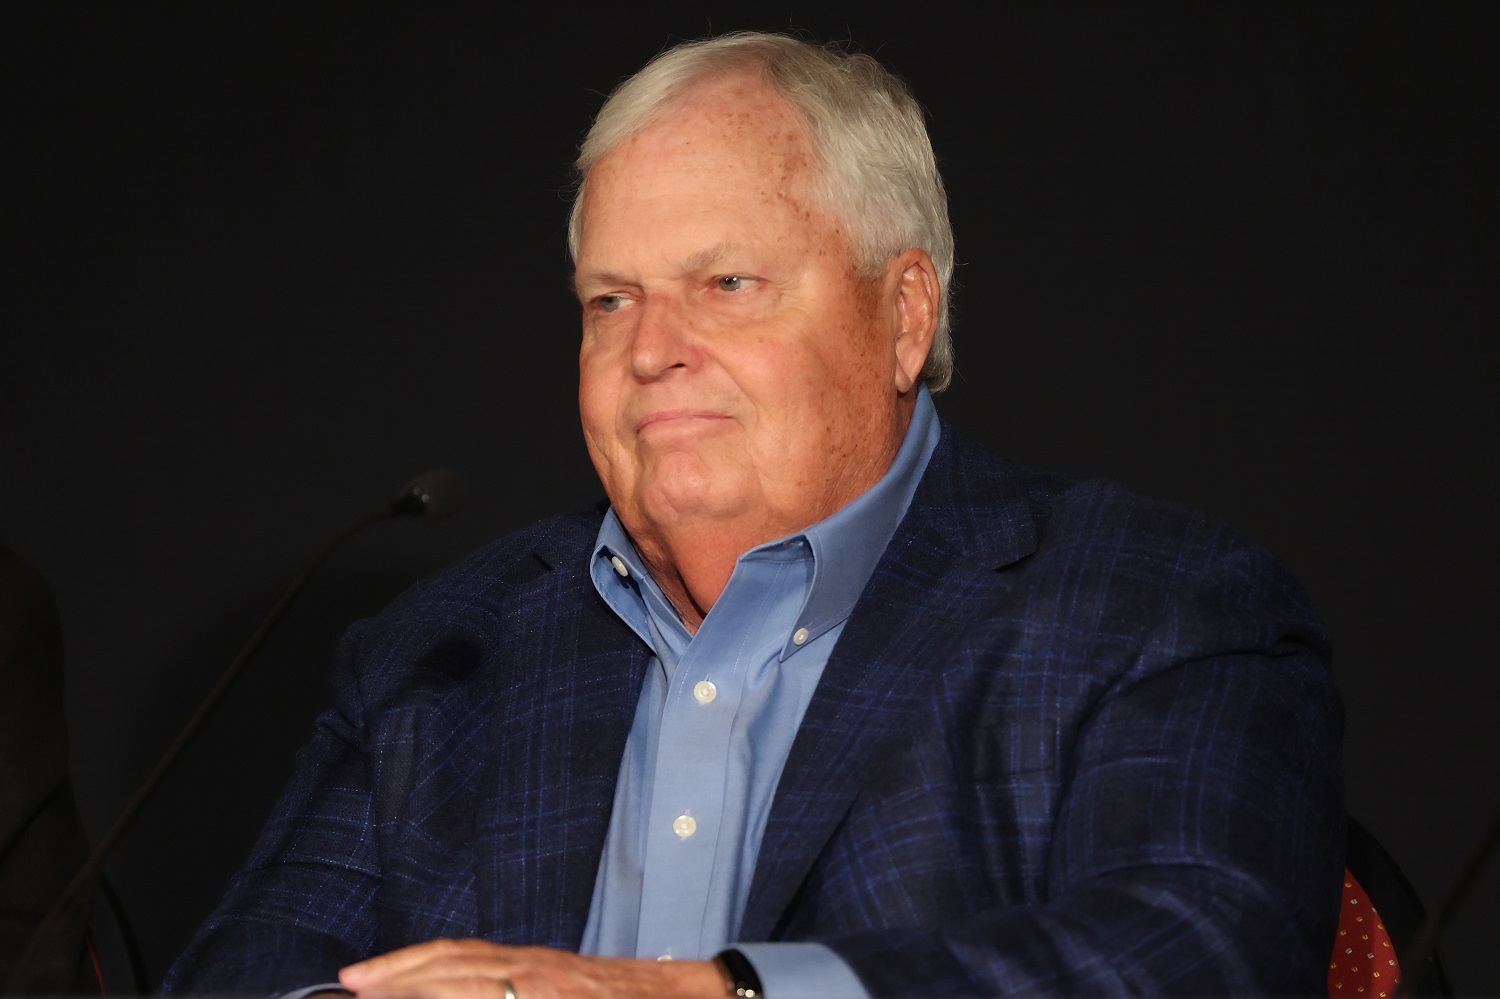 Hendrick Motorsports owner Rick Hendrick attends the NASCAR, IMSA, and Hendrick Motorsports press conference for the Garage 56 entry at the 2023 24 Hours of Le Mans announcement. |  Sam Greenwood/Getty Images